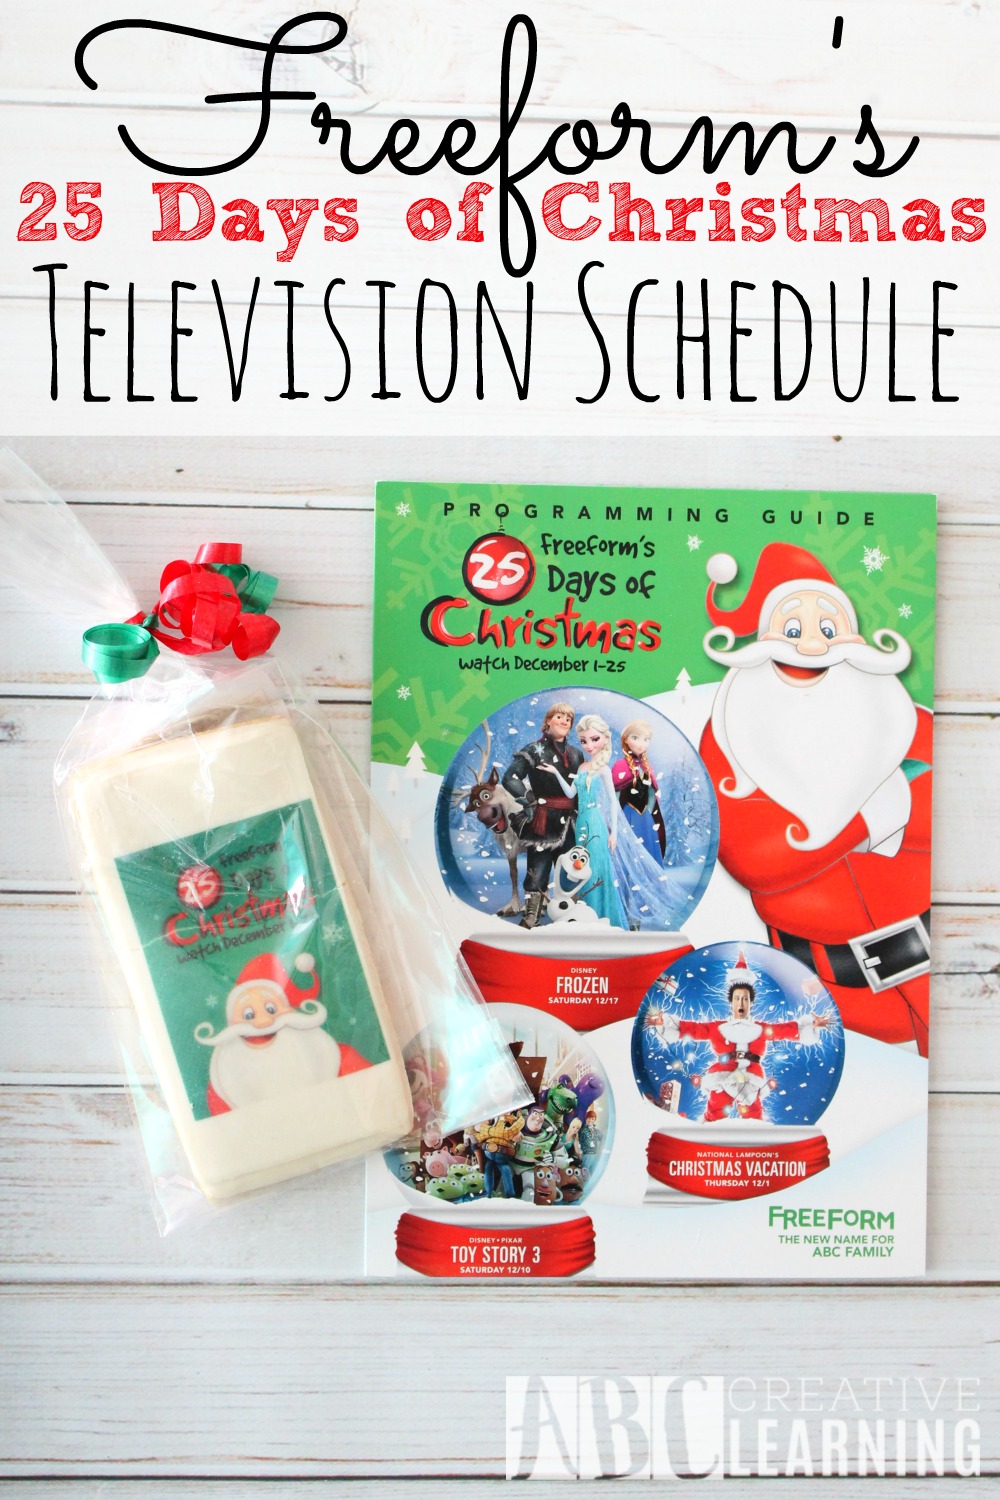 Freeform s 25 Days Of Christmas Schedule 25DaysofChristmas